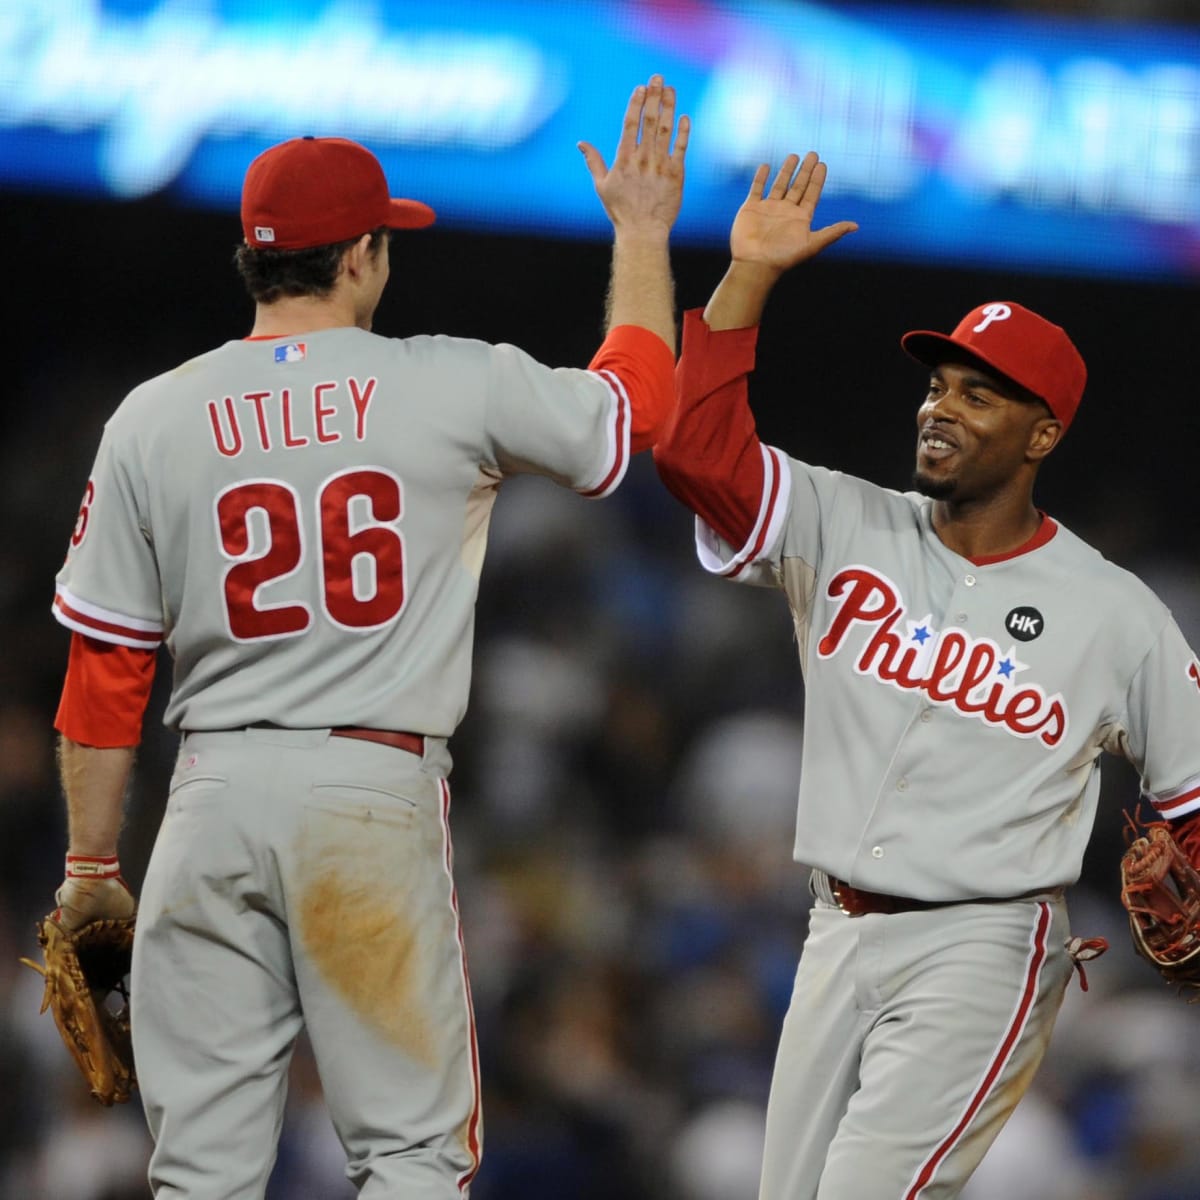 Philadelphia Phillies World Champion Chase Utley to Feature in MLB